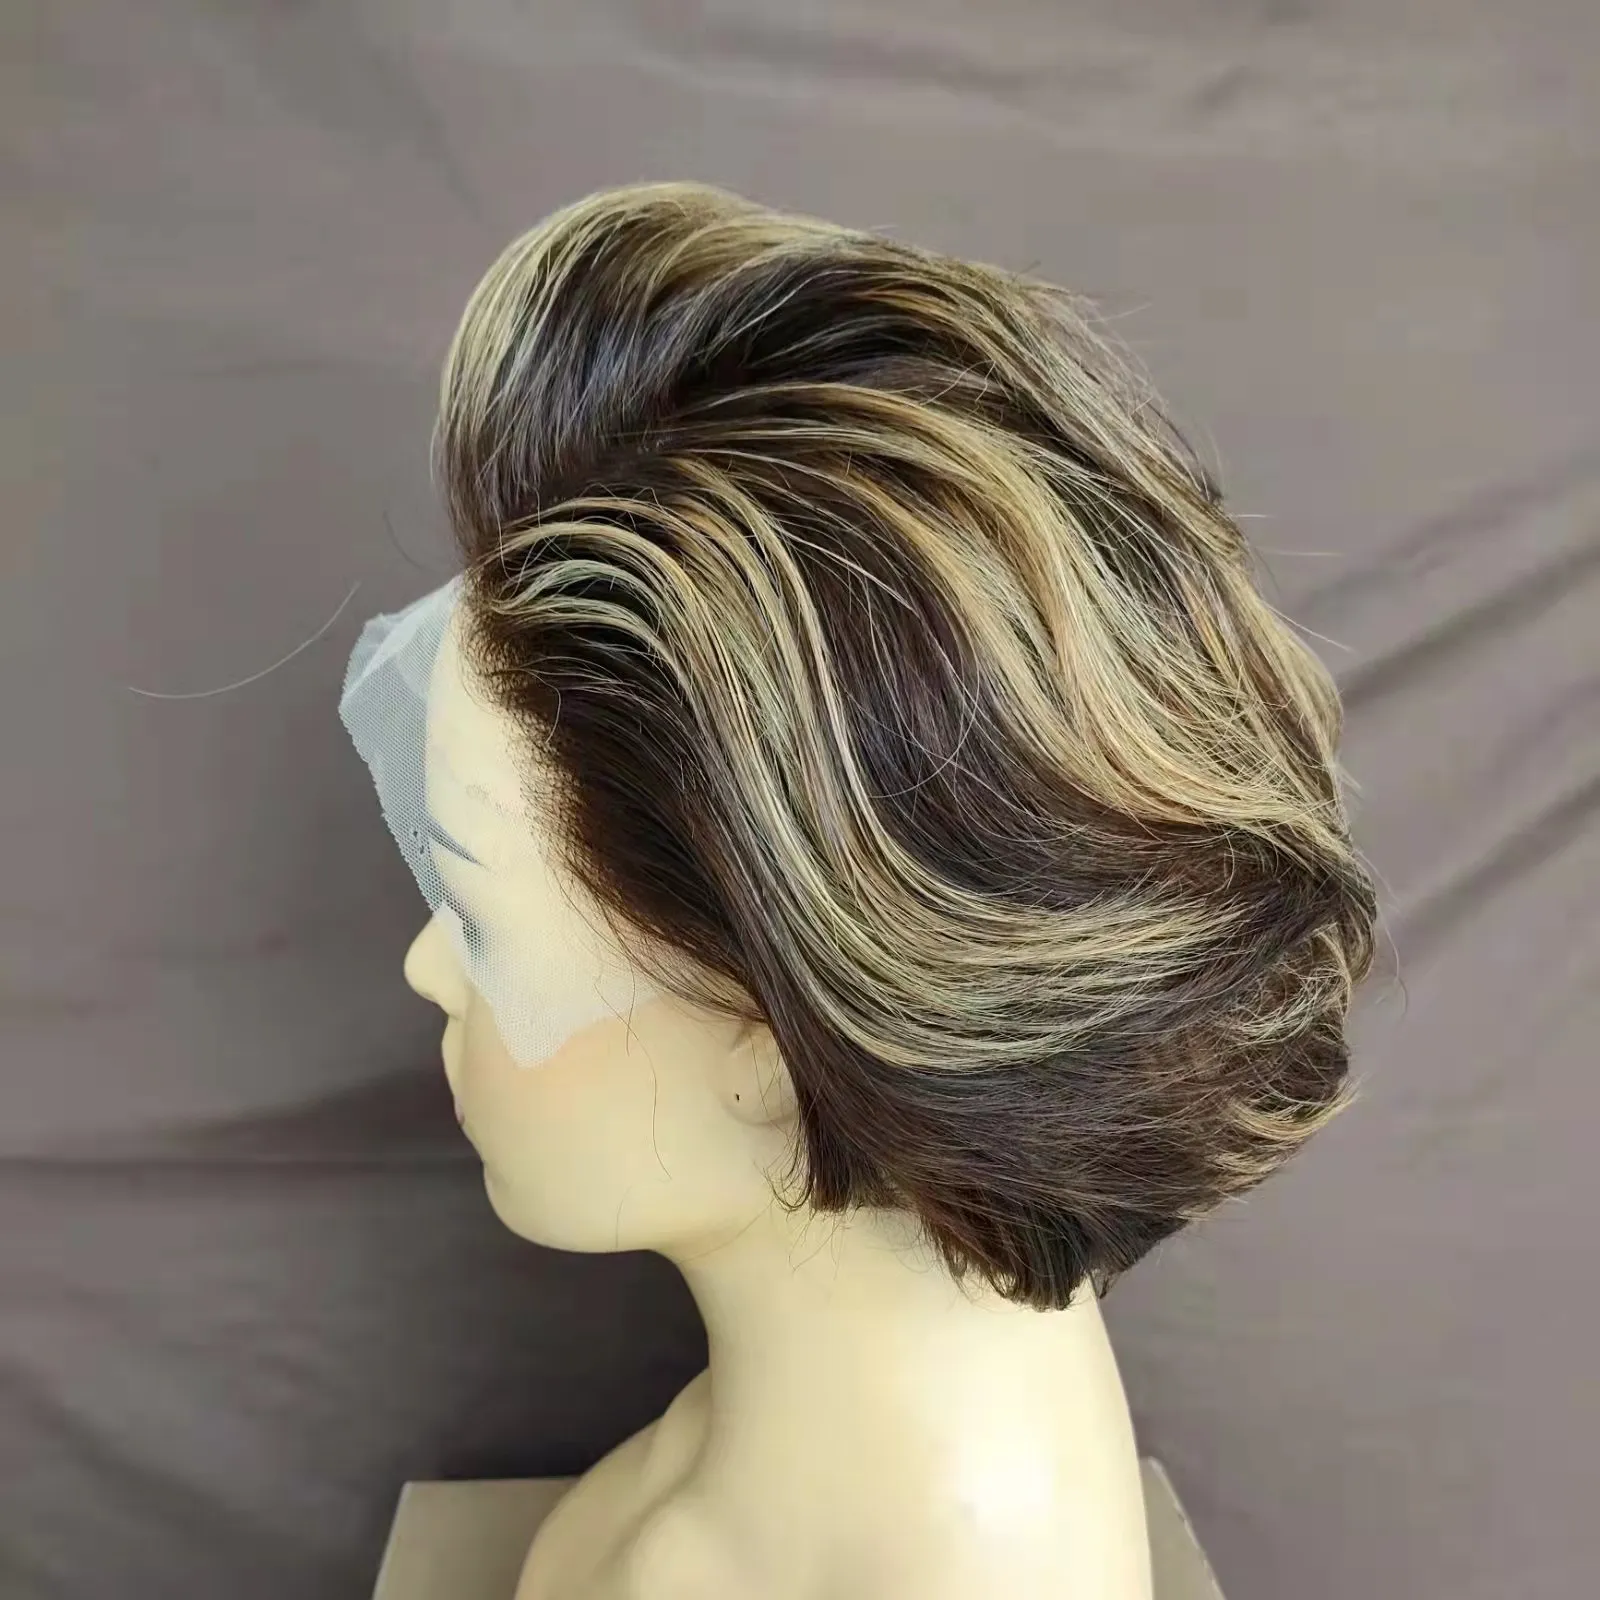 Amara best perruque pixie cut wig human hair transparent swiss lace front wig cheap wigs with lowest price in stock